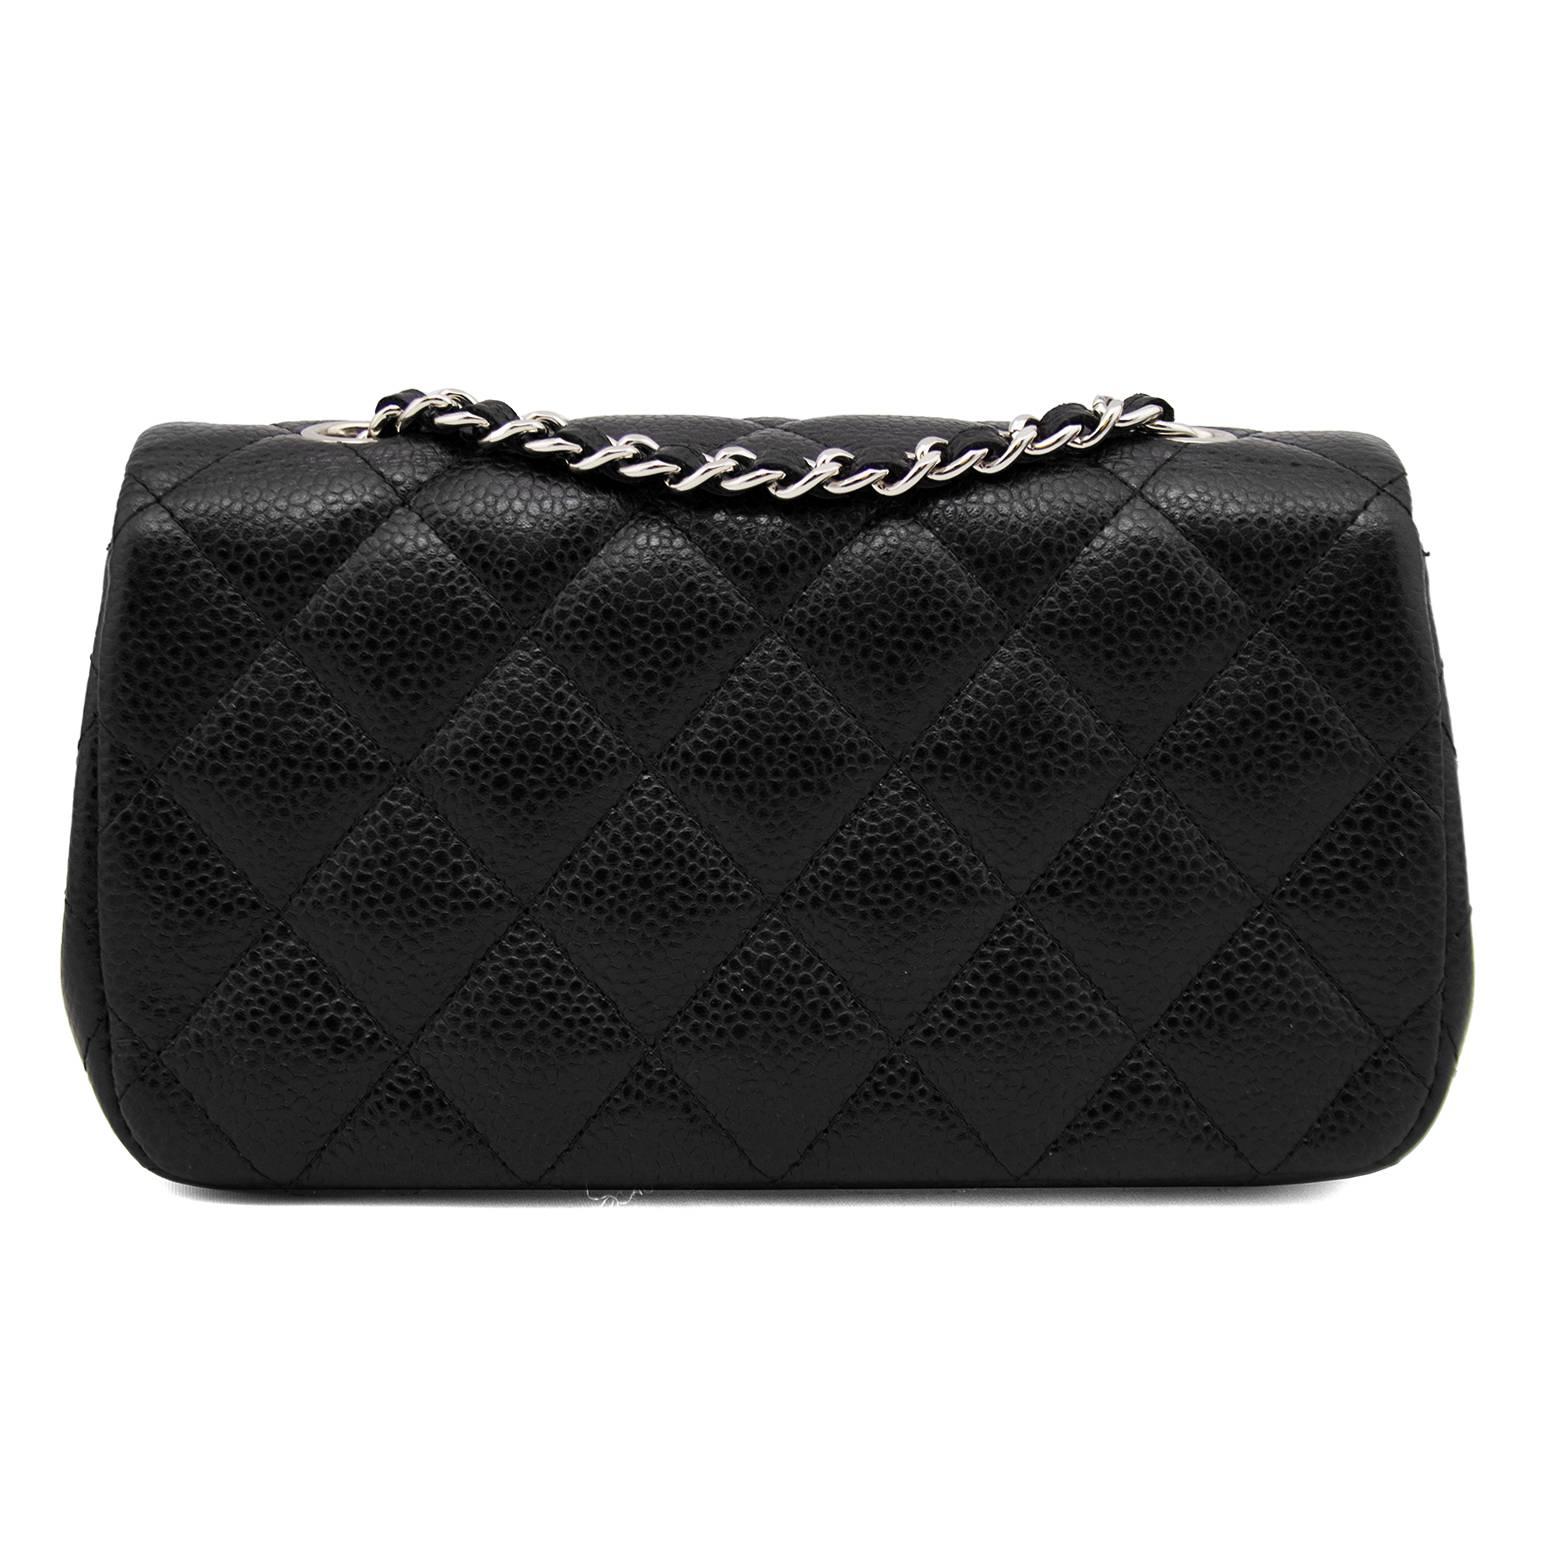 2013 Chanel Black Quilted Caviar Leather Chanel Classic Mini Flap Bag In Excellent Condition In Toronto, Ontario